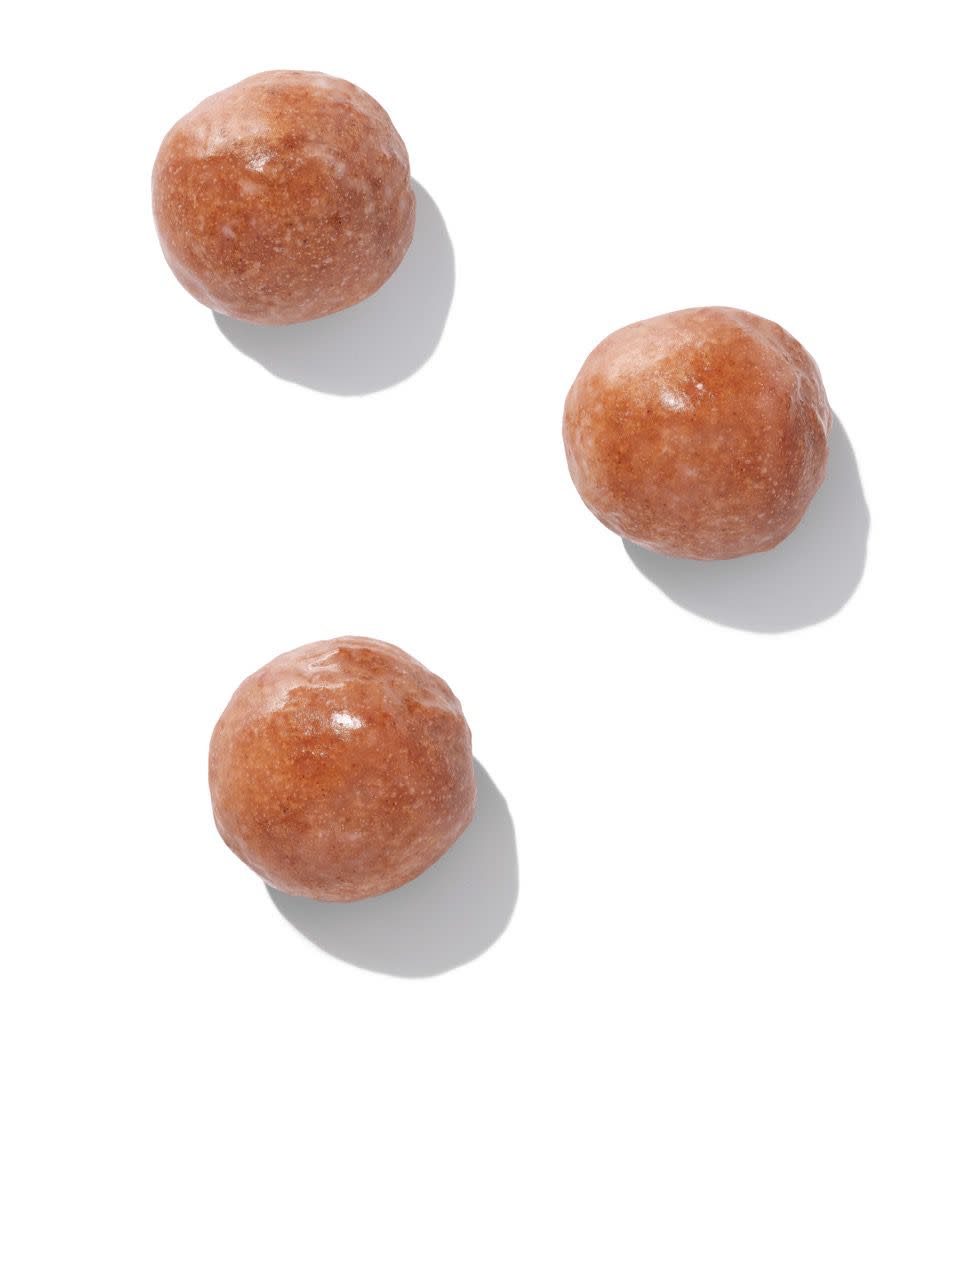 Dunkin' Retail 23 Window 5 Retouched Product Image: Pumpkin Munchkins (3) (overhead view)
(image + shadow + white background/transparency)